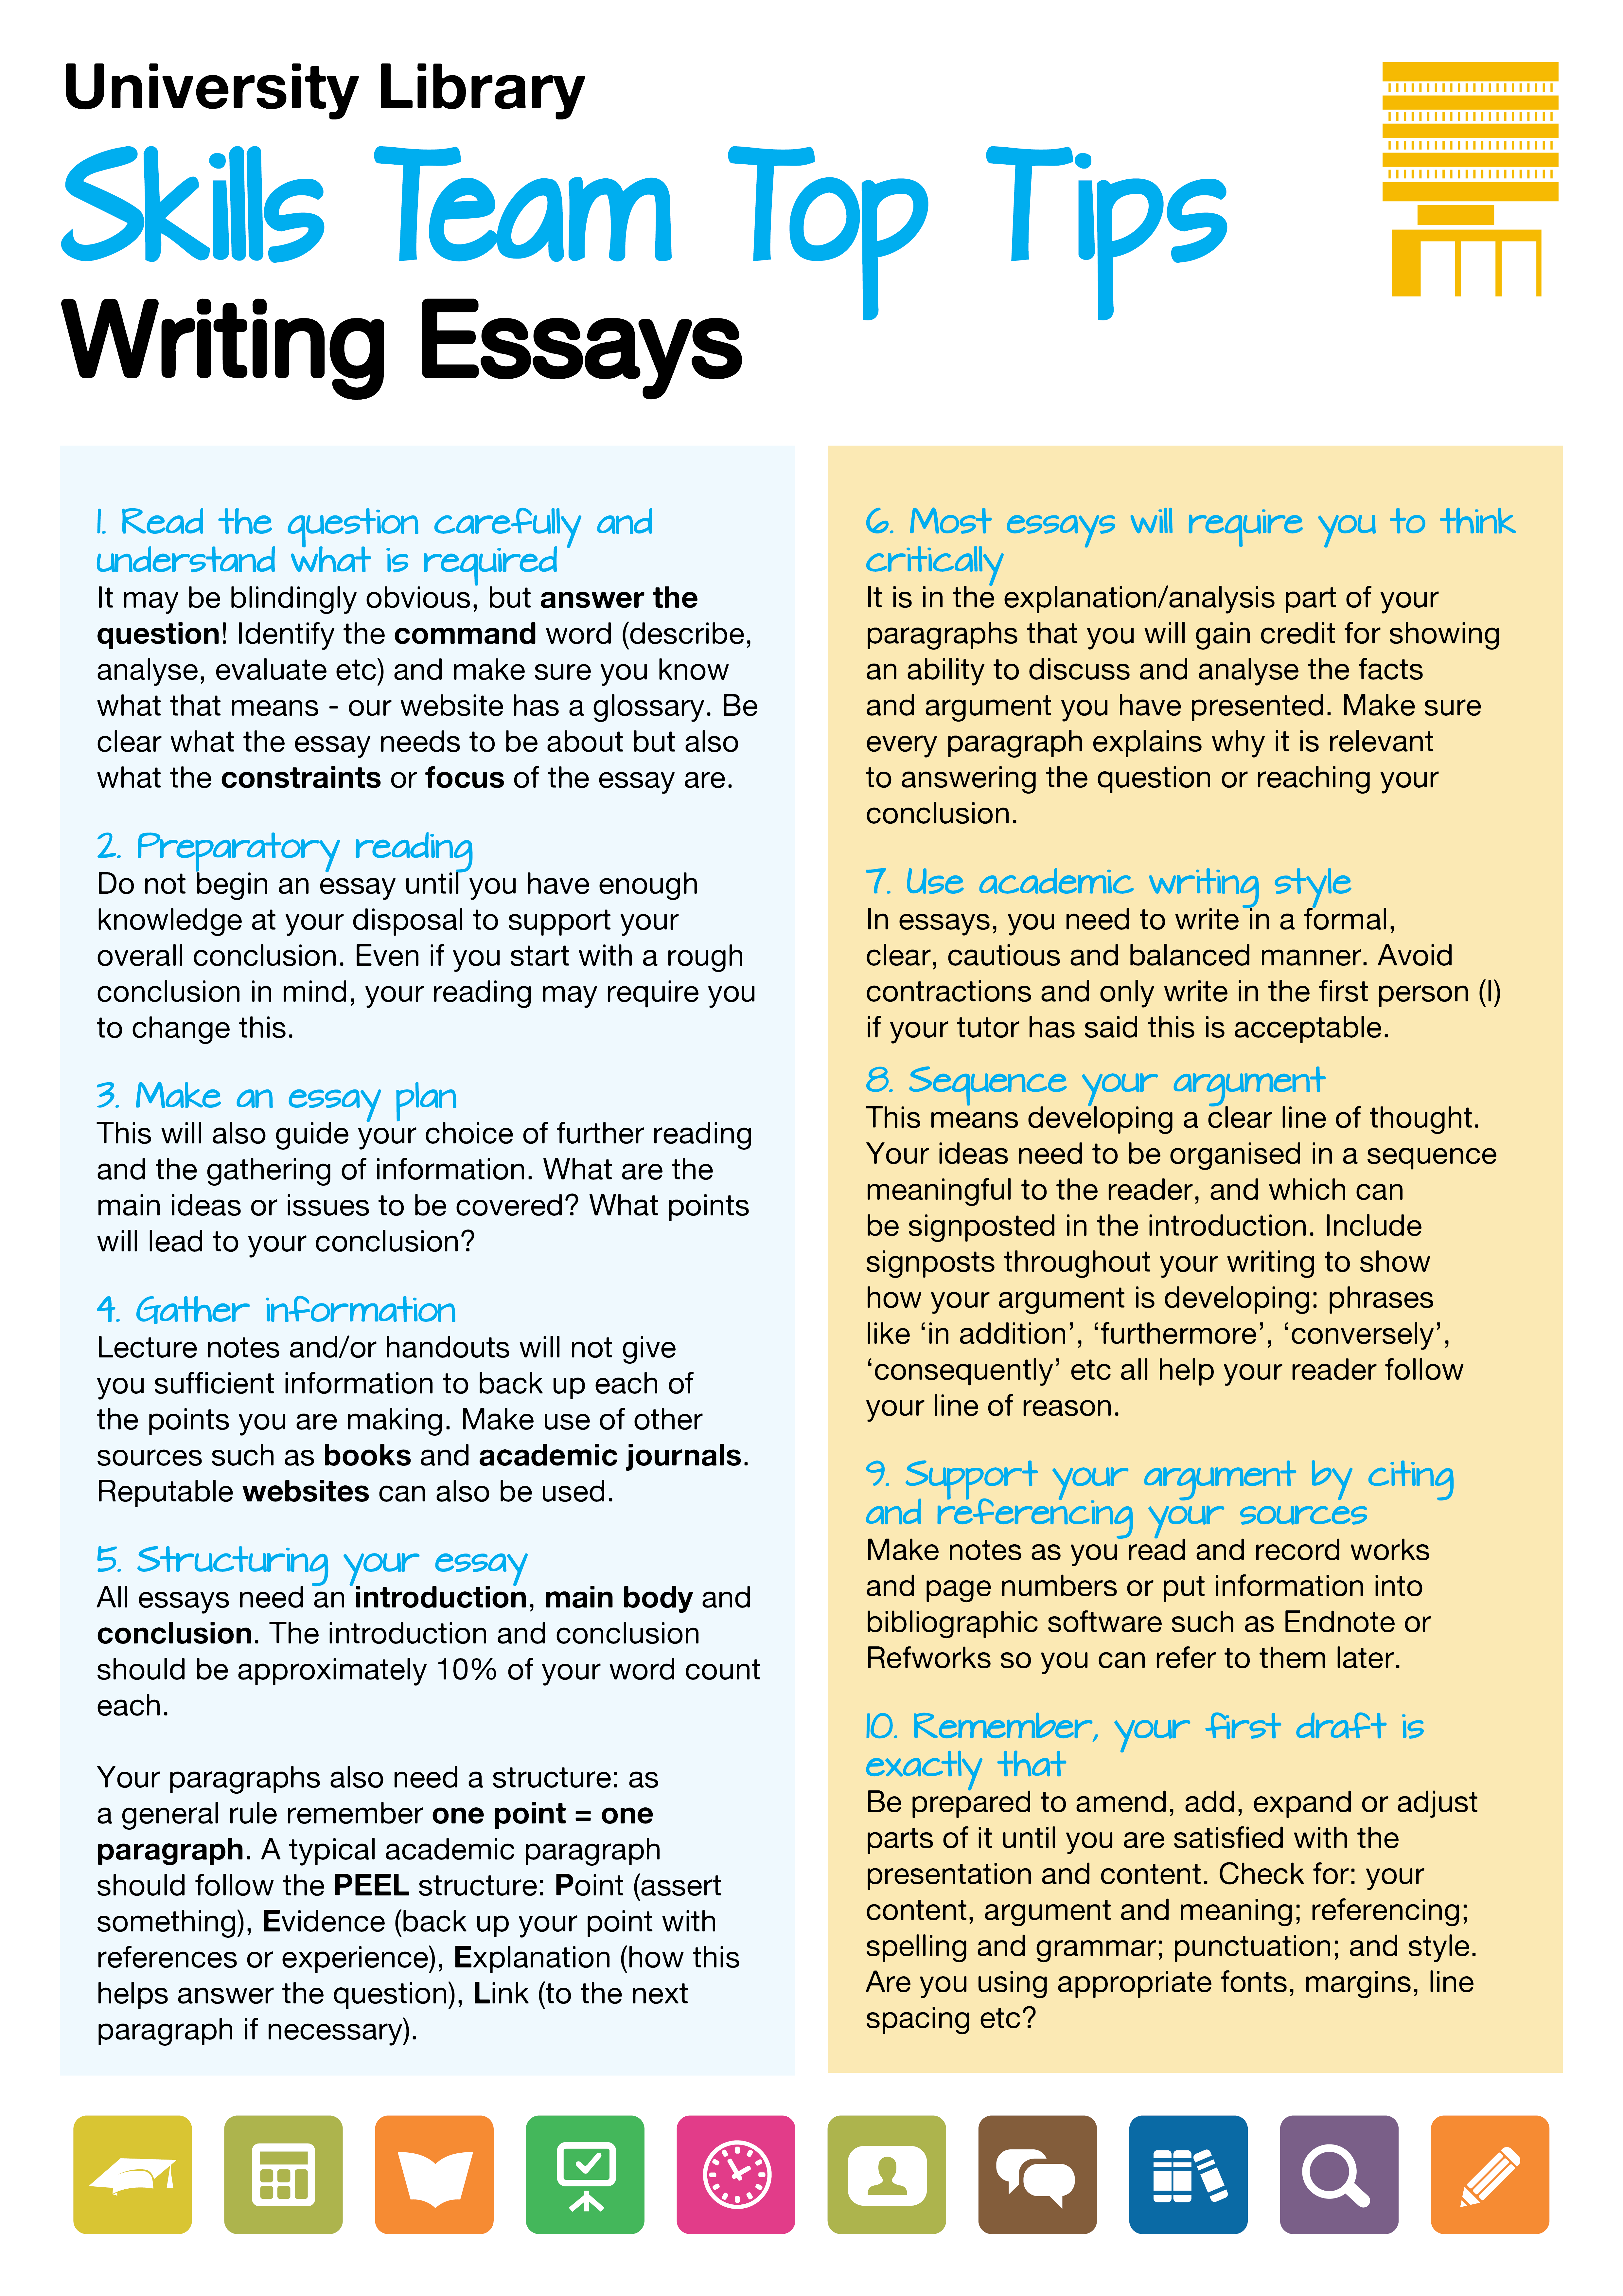 Premium Help with Essay Writing That Every Student Can Afford